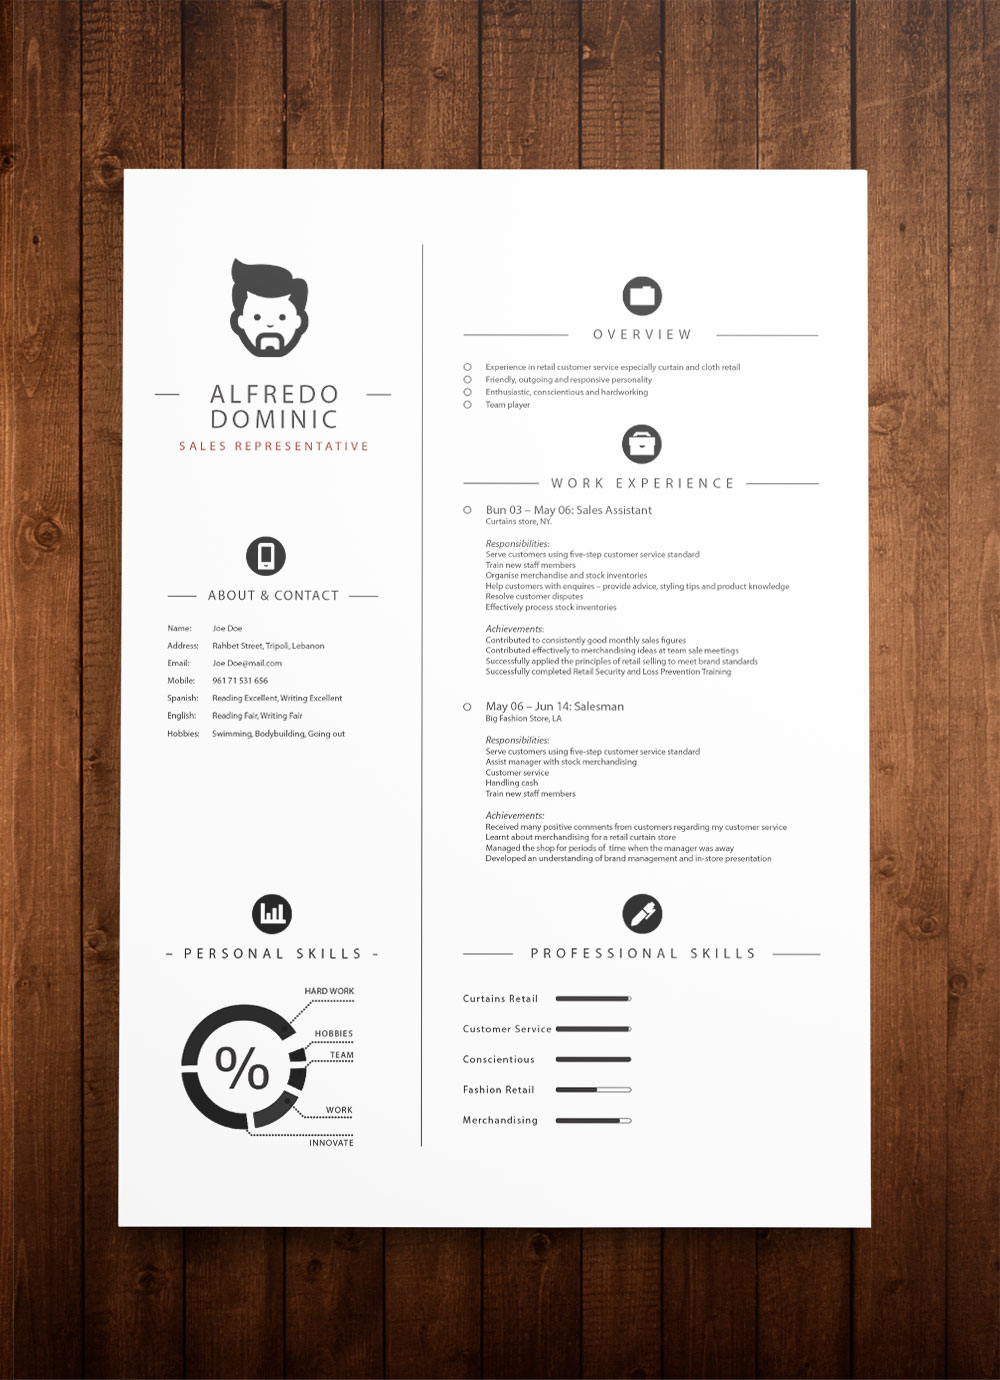 Professional Curriculum Vitae Template from www.worldofresumes.net